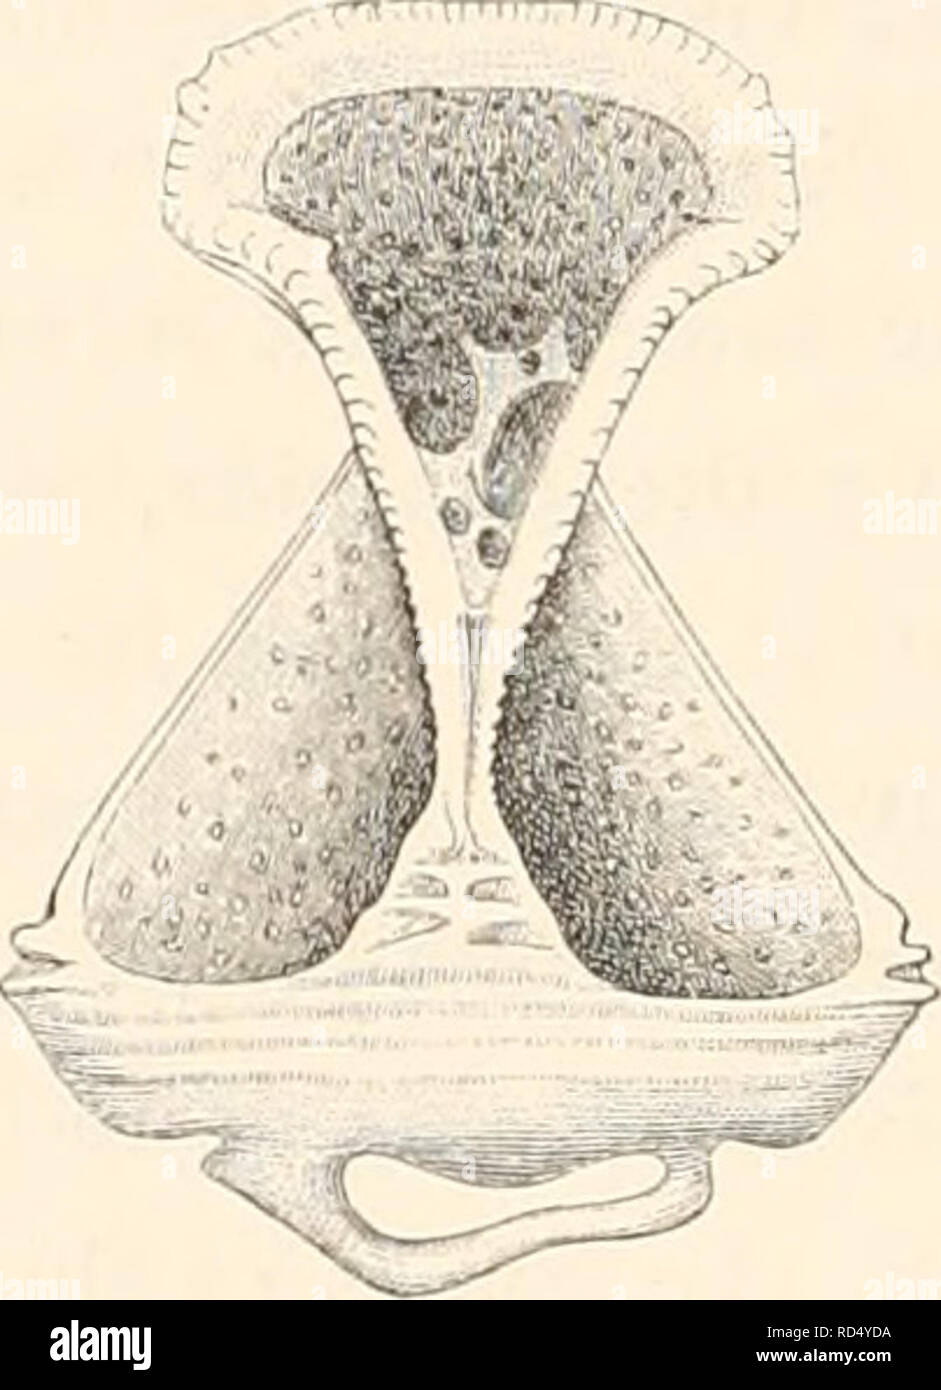 . The Danish Ingolf-Expedition. Scientific expeditions; Arctic Ocean. Fig. 10. Fig. 11. Fig. 10. Valve of tridentate pedicellaria of Arceosoma violaceum. Obj. AA. Oc. II. (Zeiss). Fig. 11. Valve of ophicephalous pedicellaria of Hygrosoma Petersii. Obj. A A. Oc. I. (Zeiss). Hygrosoma Petersii (p. 59). In a specimen of this species (the Azores, 1258 m. Talisman . The museum of Paris) was found a pedicellaria (Fig. 11) forming a transition between the ophicephal- ous pedicellariae in Tromikosoma Koehleri and the short, thick pedicellaria; of //. luculentum. After this there can be no doubt that l Stock Photo